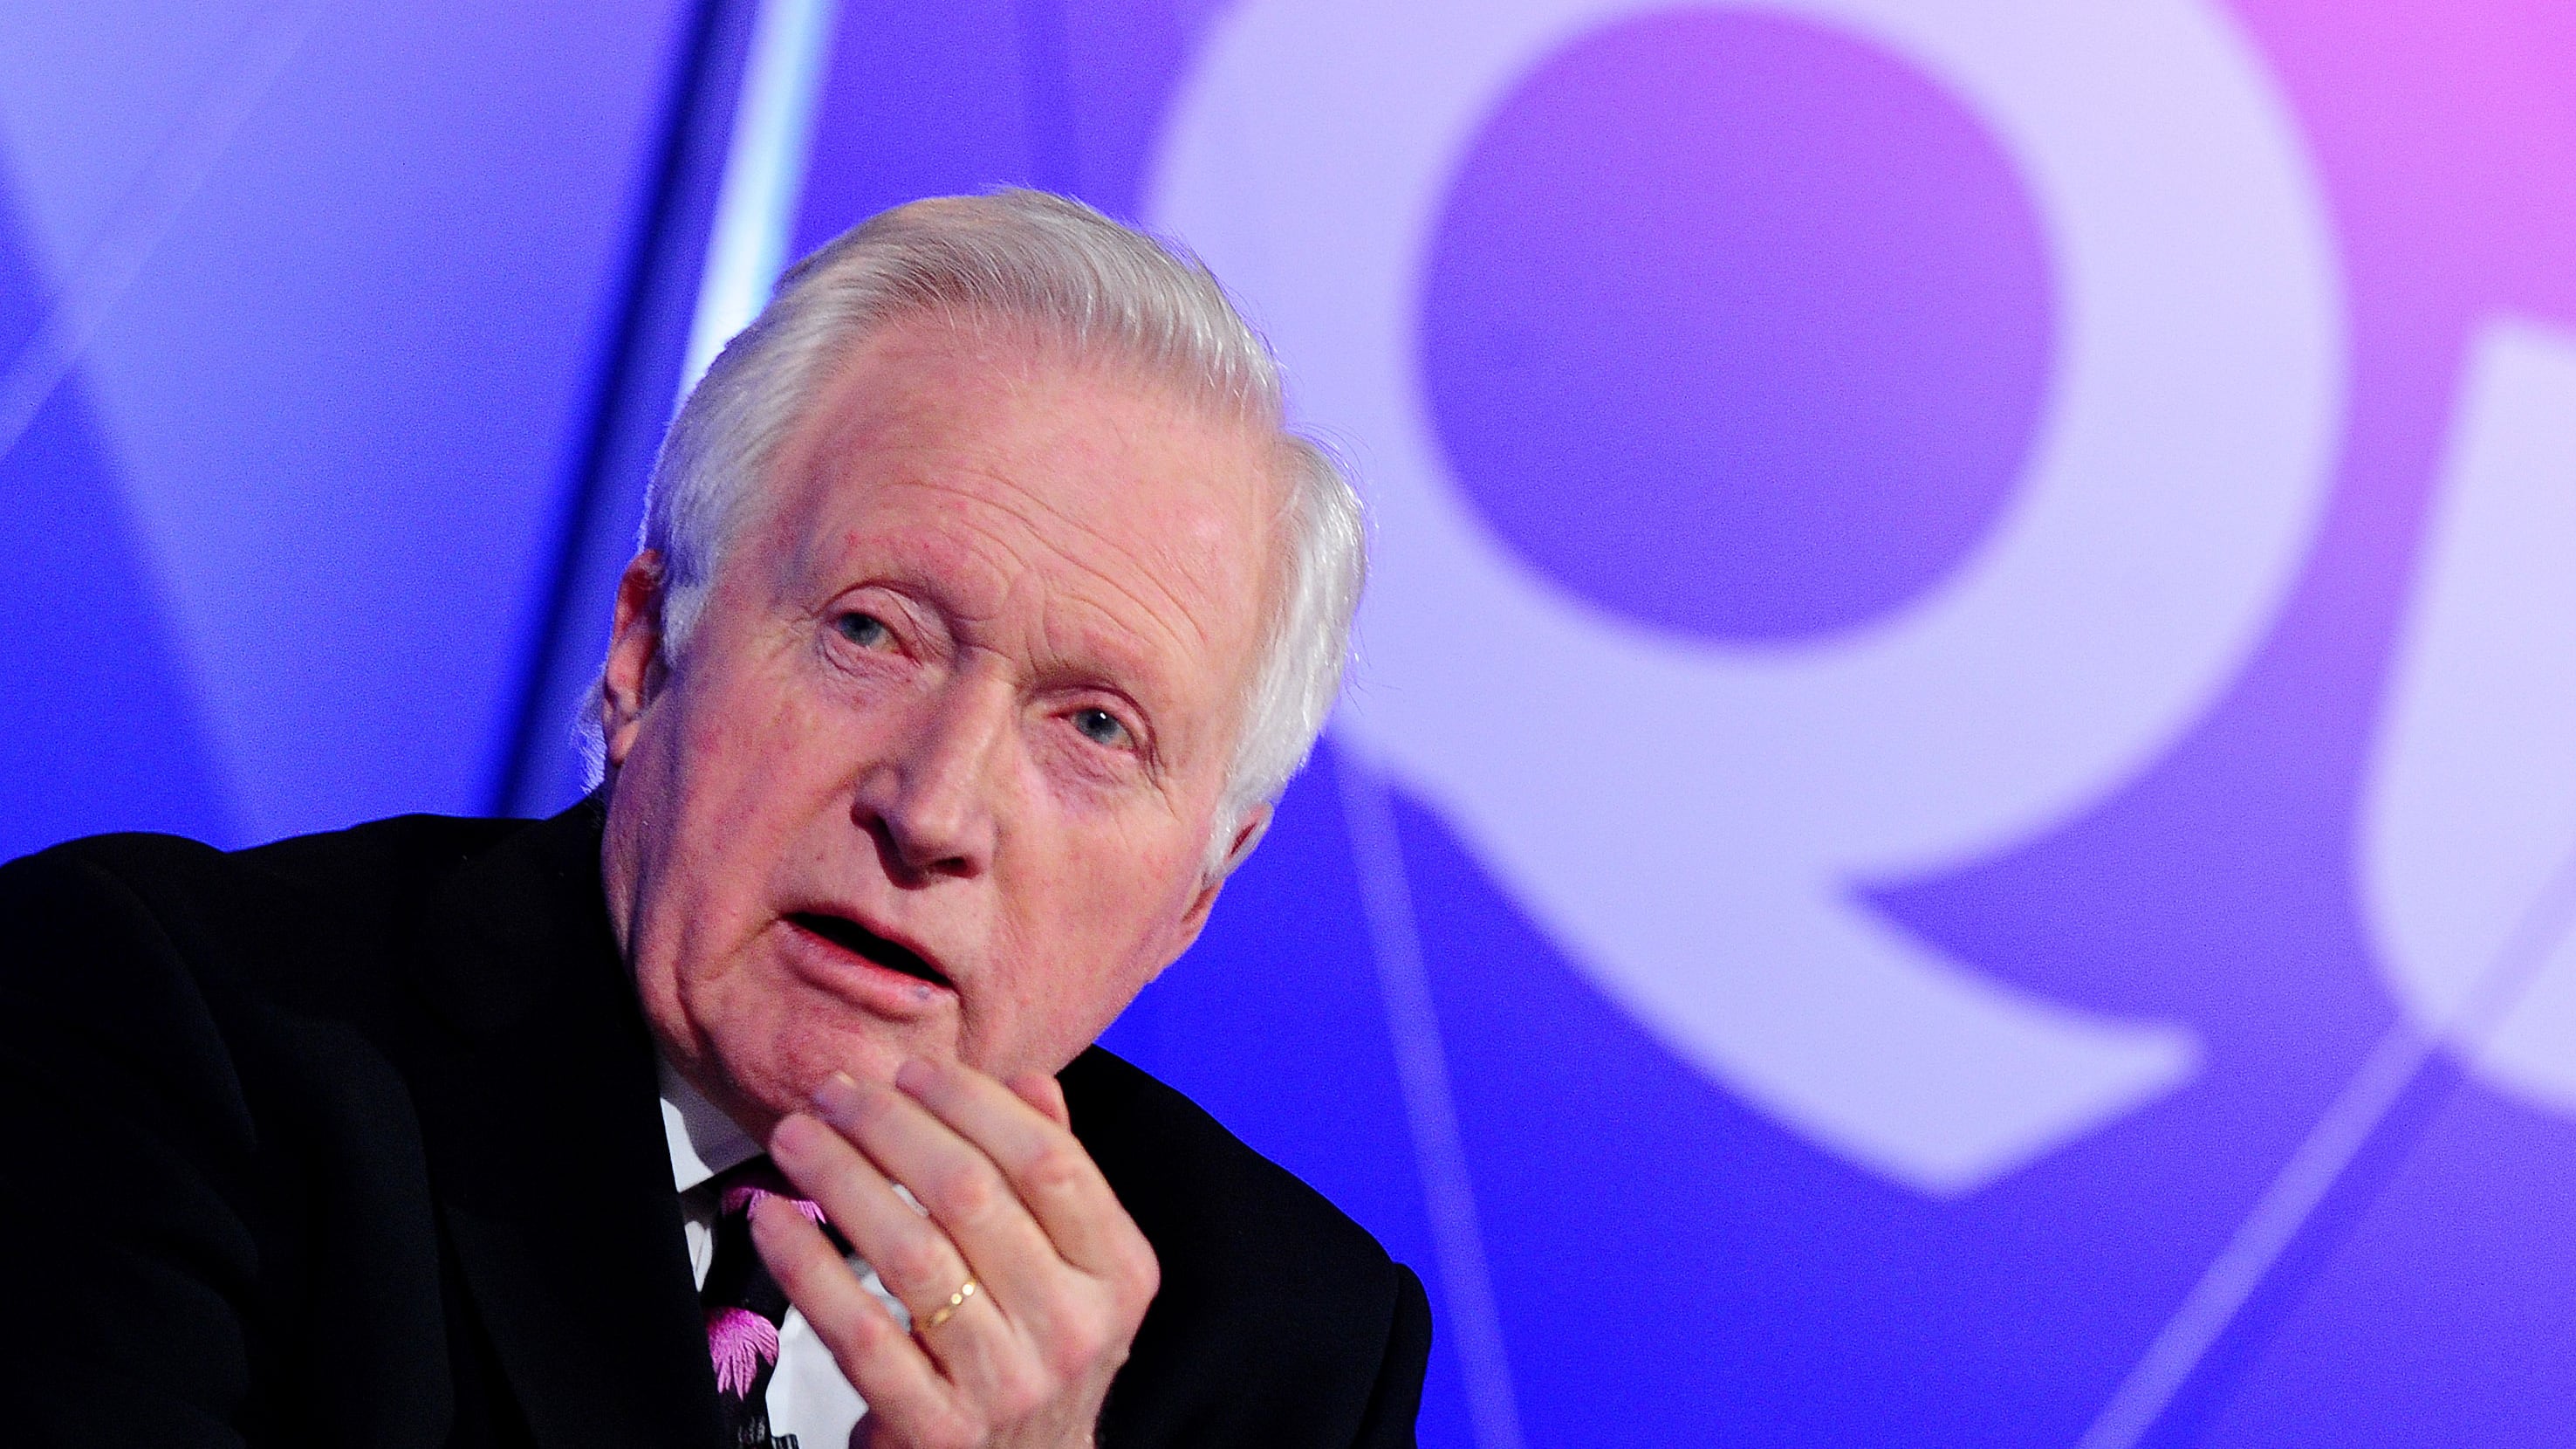 David Dimbleby says he fears for the future of the BBC